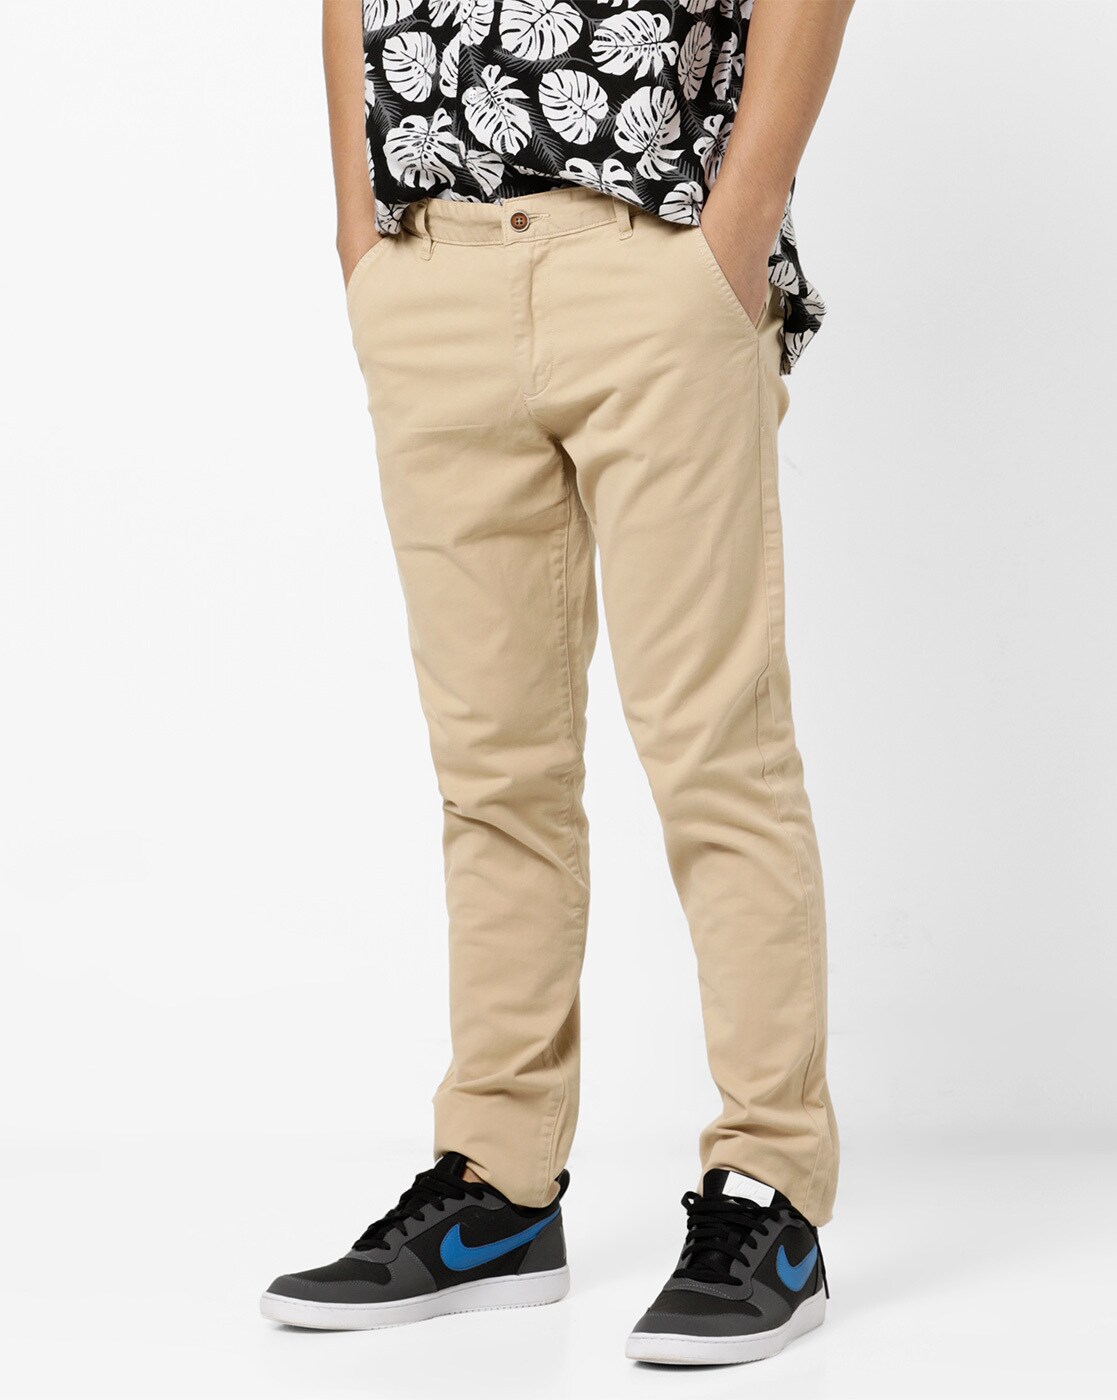 twill pants Buy Men Regular Fit Pants for best price at INR 450  Piece   Approx 